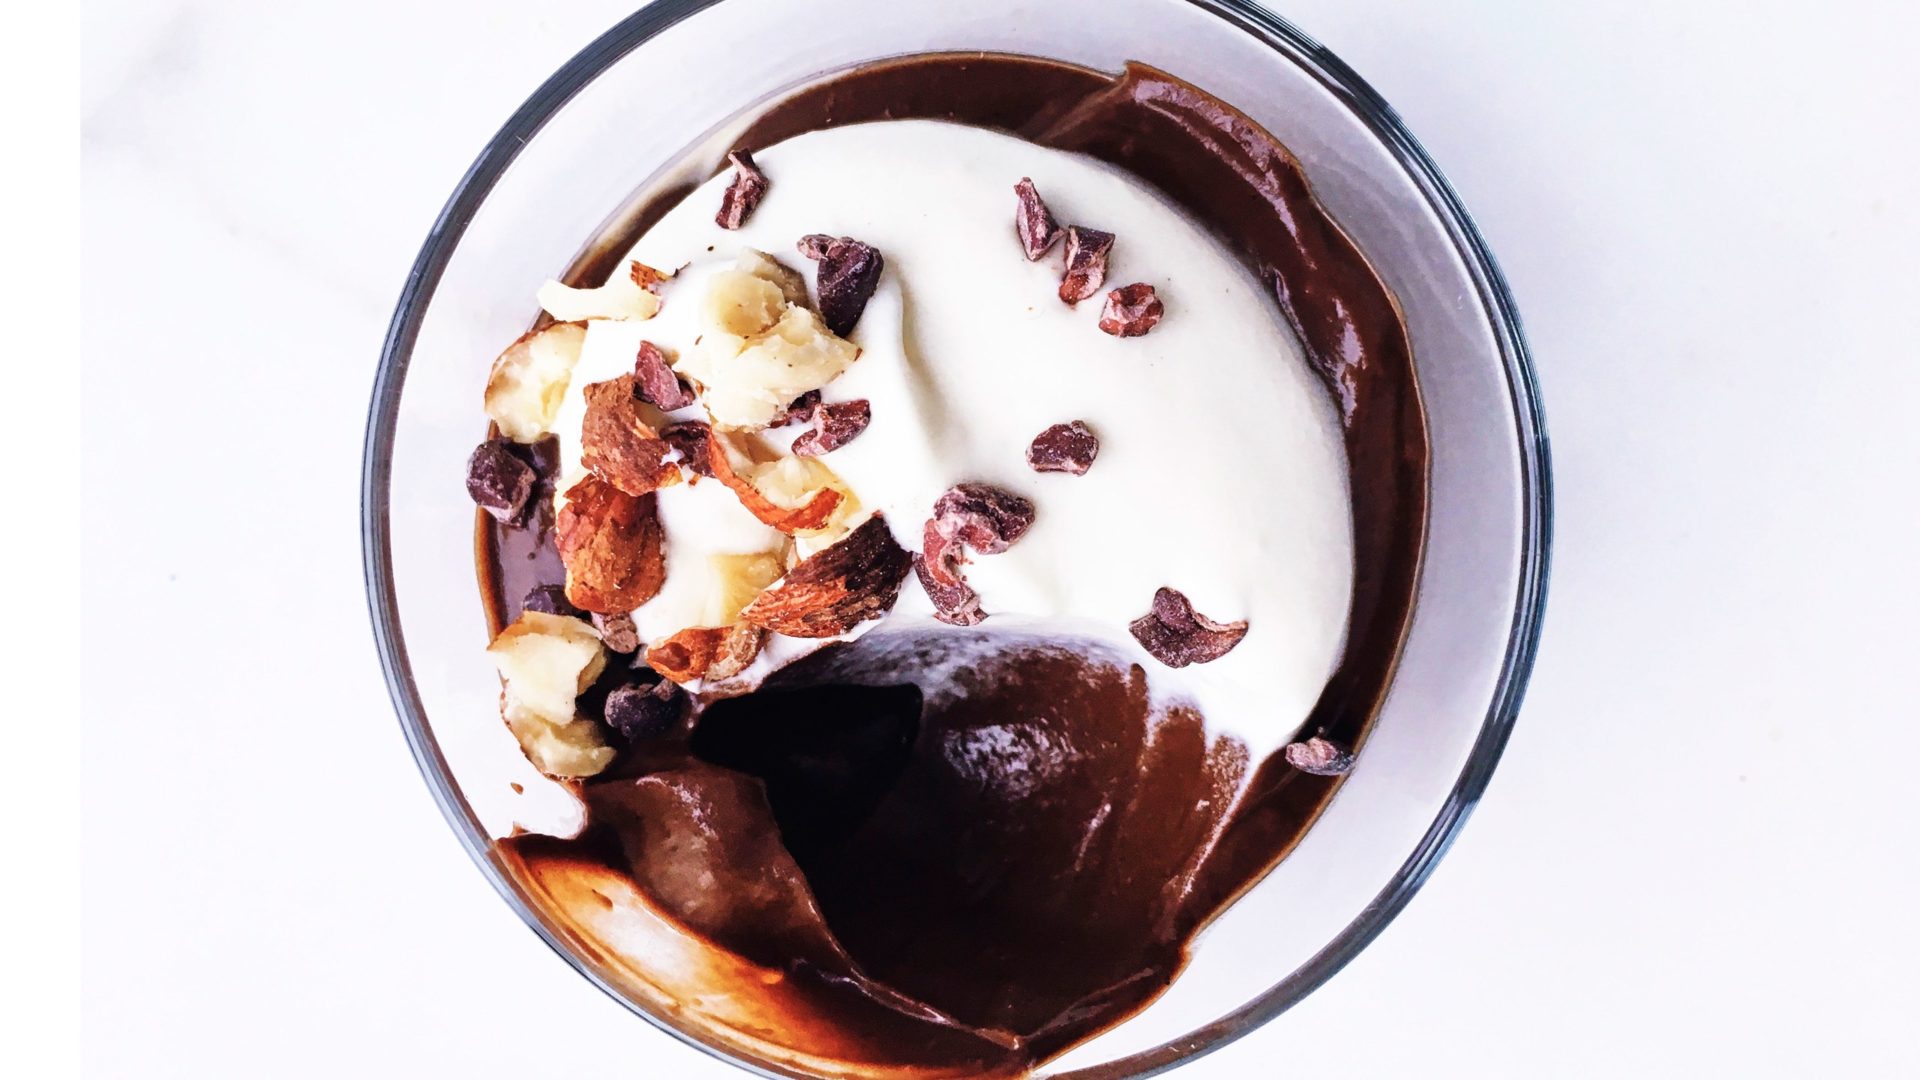 Sweet Joy! 5 Guilt-Free Desserts You Can Make Tonight to Celebrate the Weekend